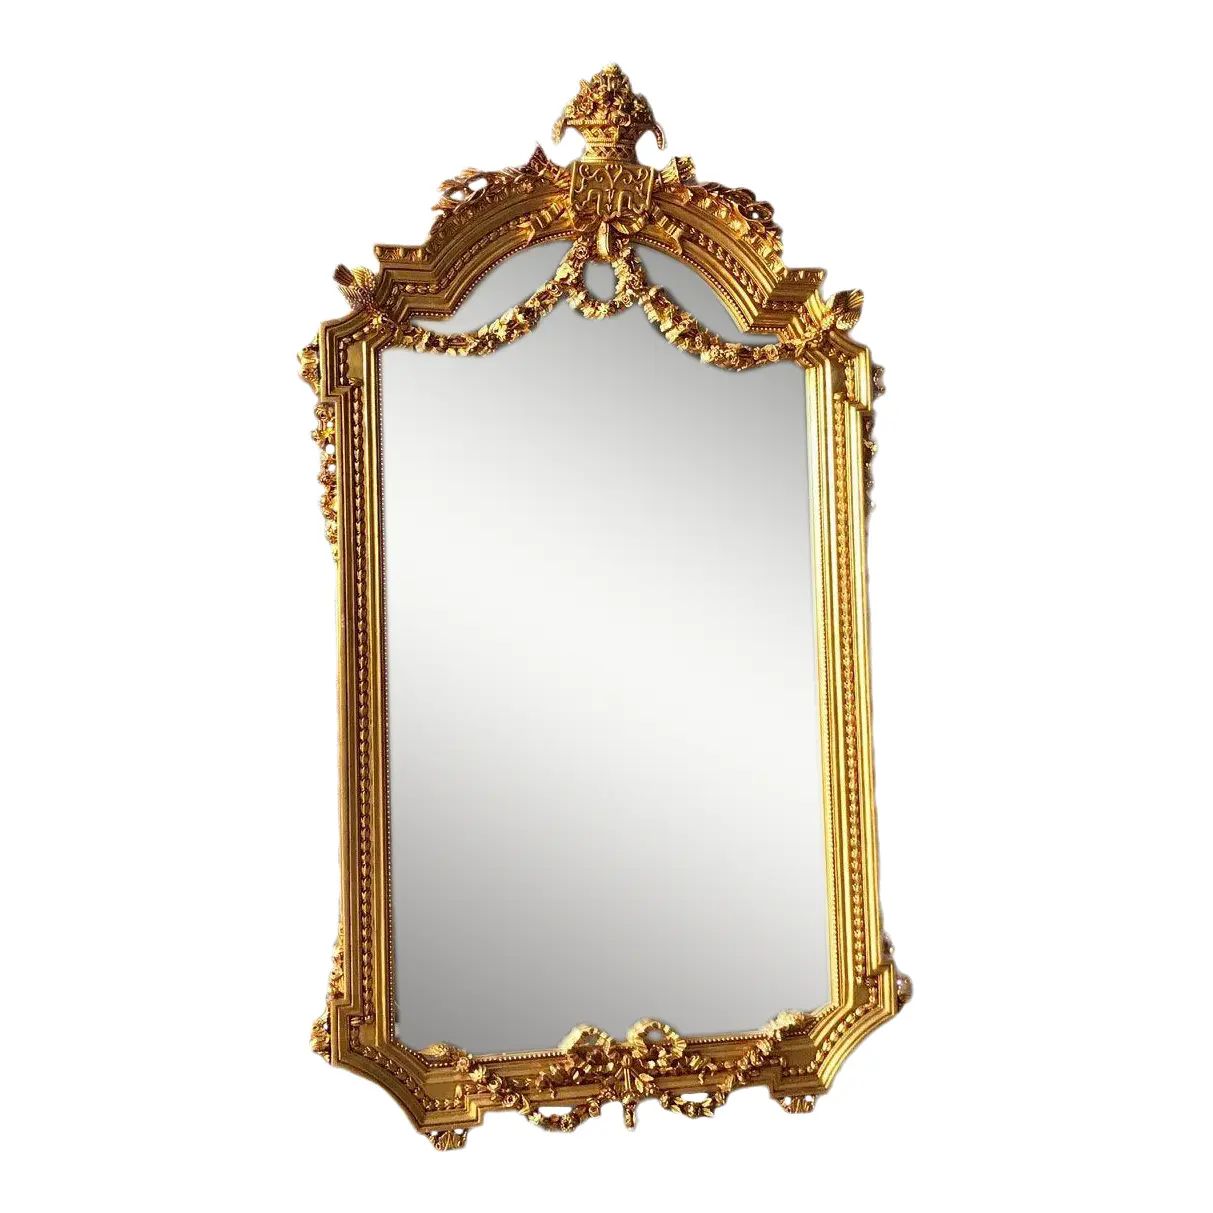 Custom Made French Louis XVI Style Gold Leaf Wooden Floor Mirror in Any Dimension | Chairish